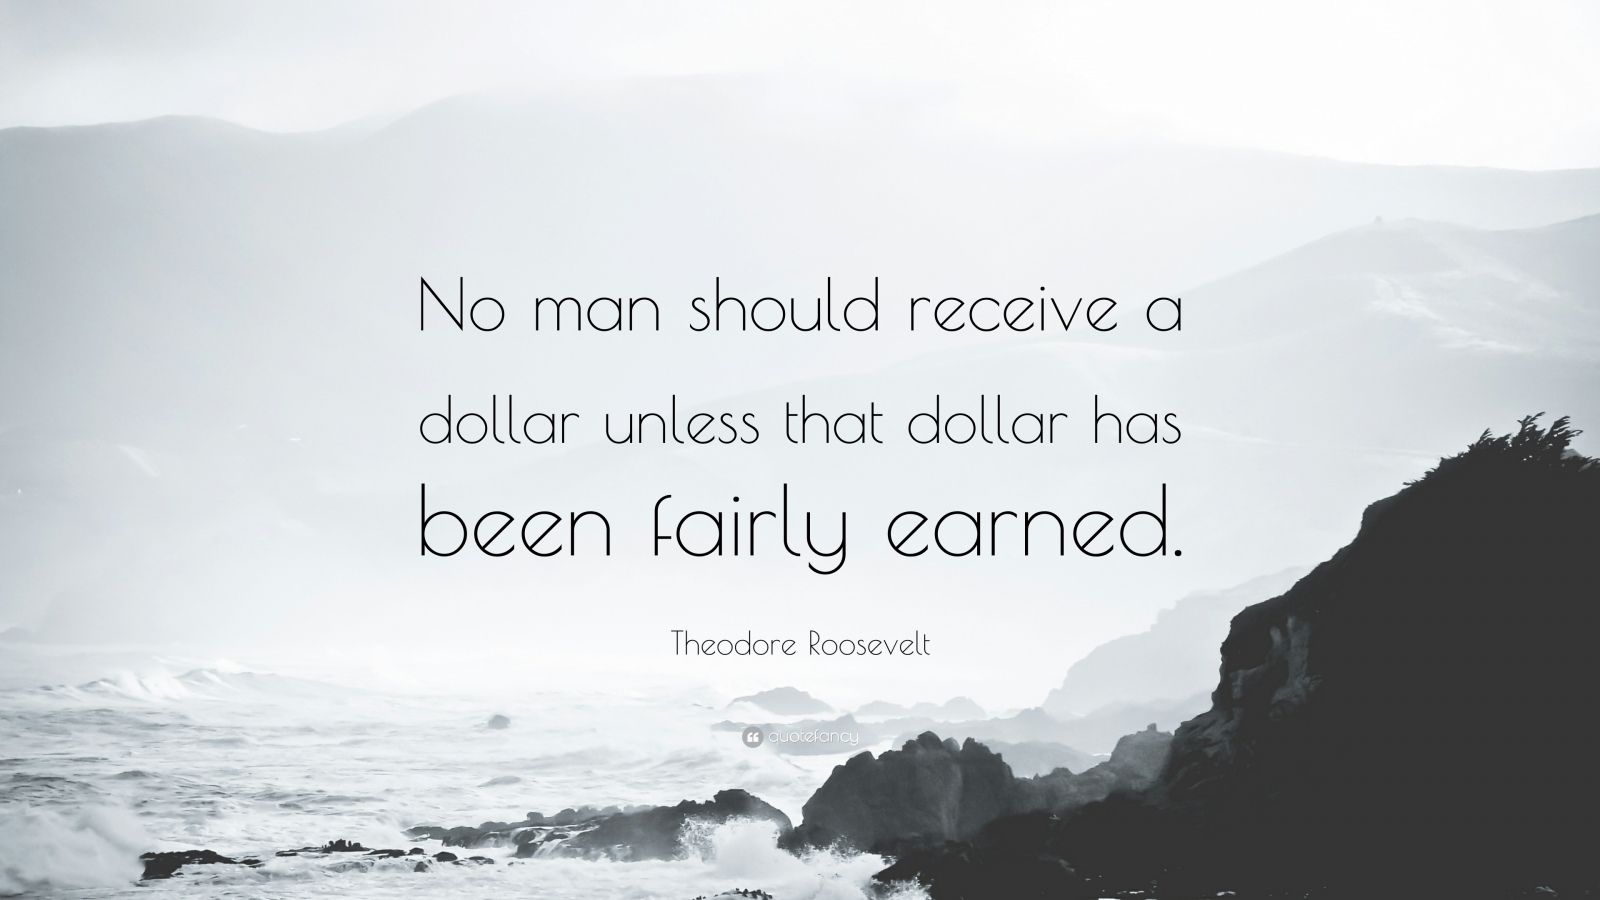 Theodore Roosevelt Quote “No man should receive a dollar unless that dollar has been